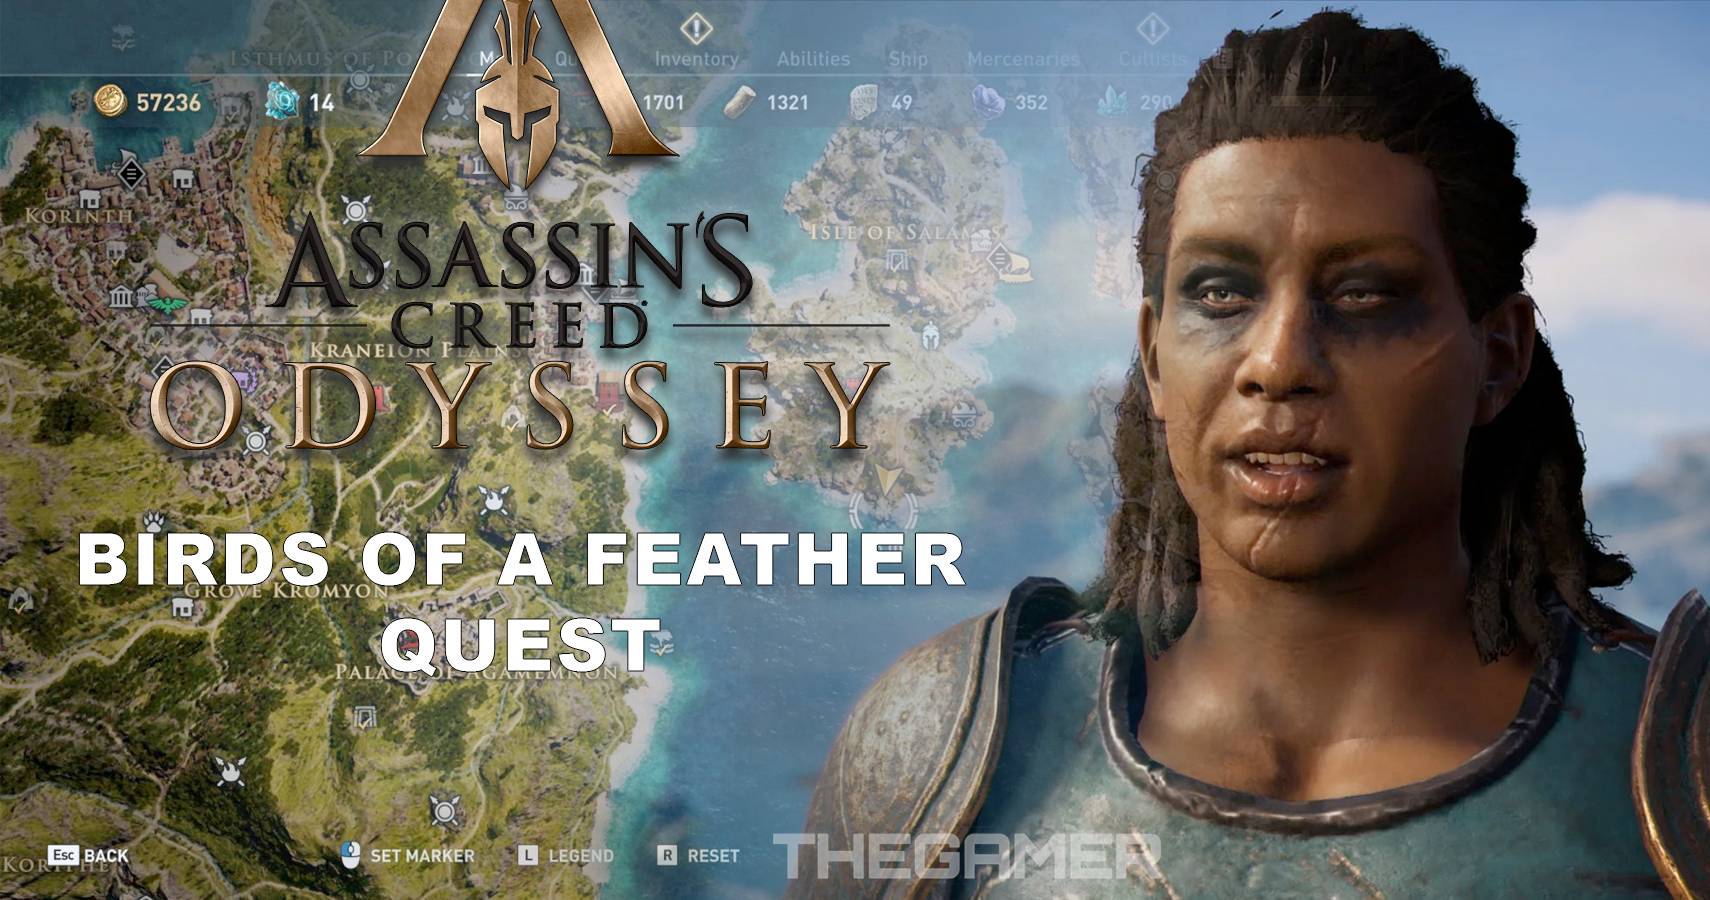 Birds of a feather assassin's creed